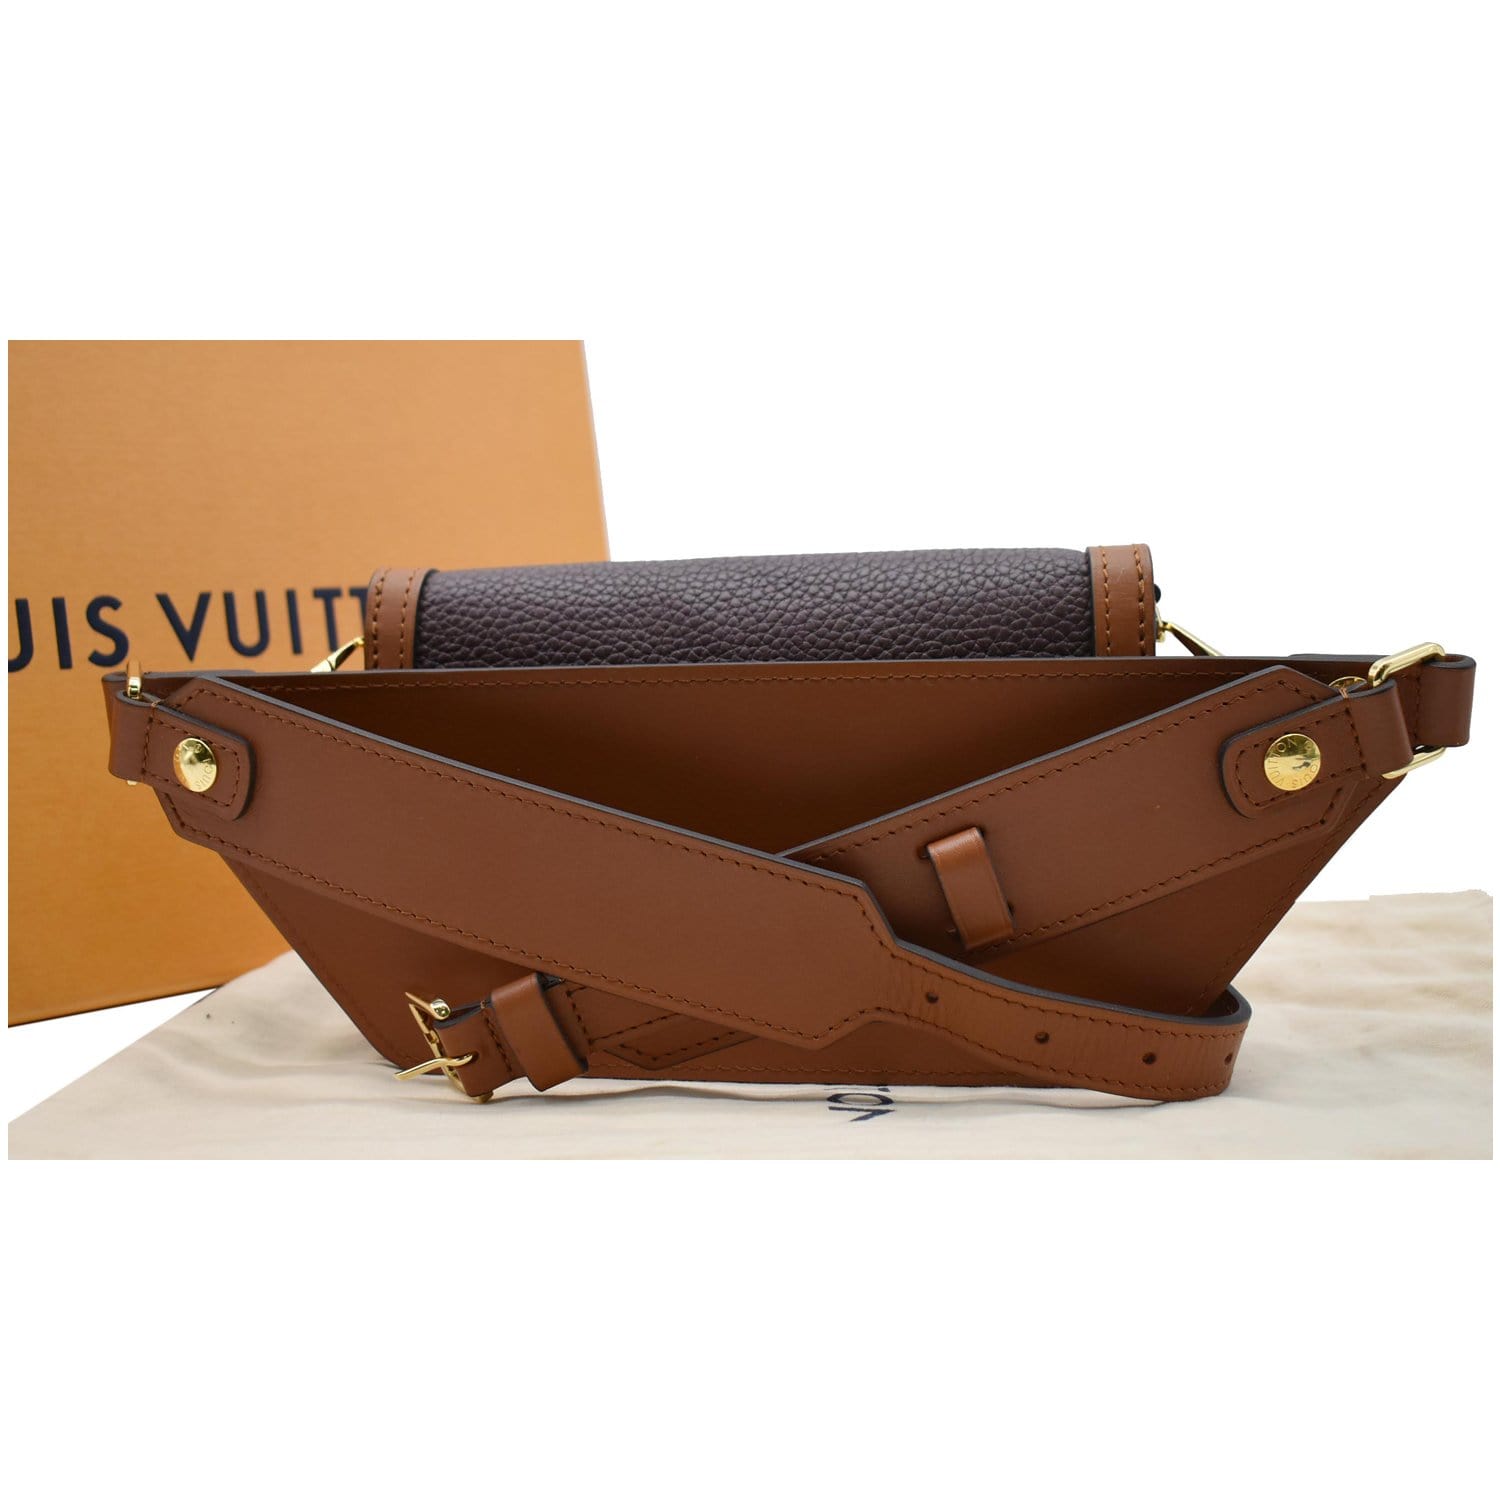 Dauphine belt bag leather mini bag Louis Vuitton Brown in Leather